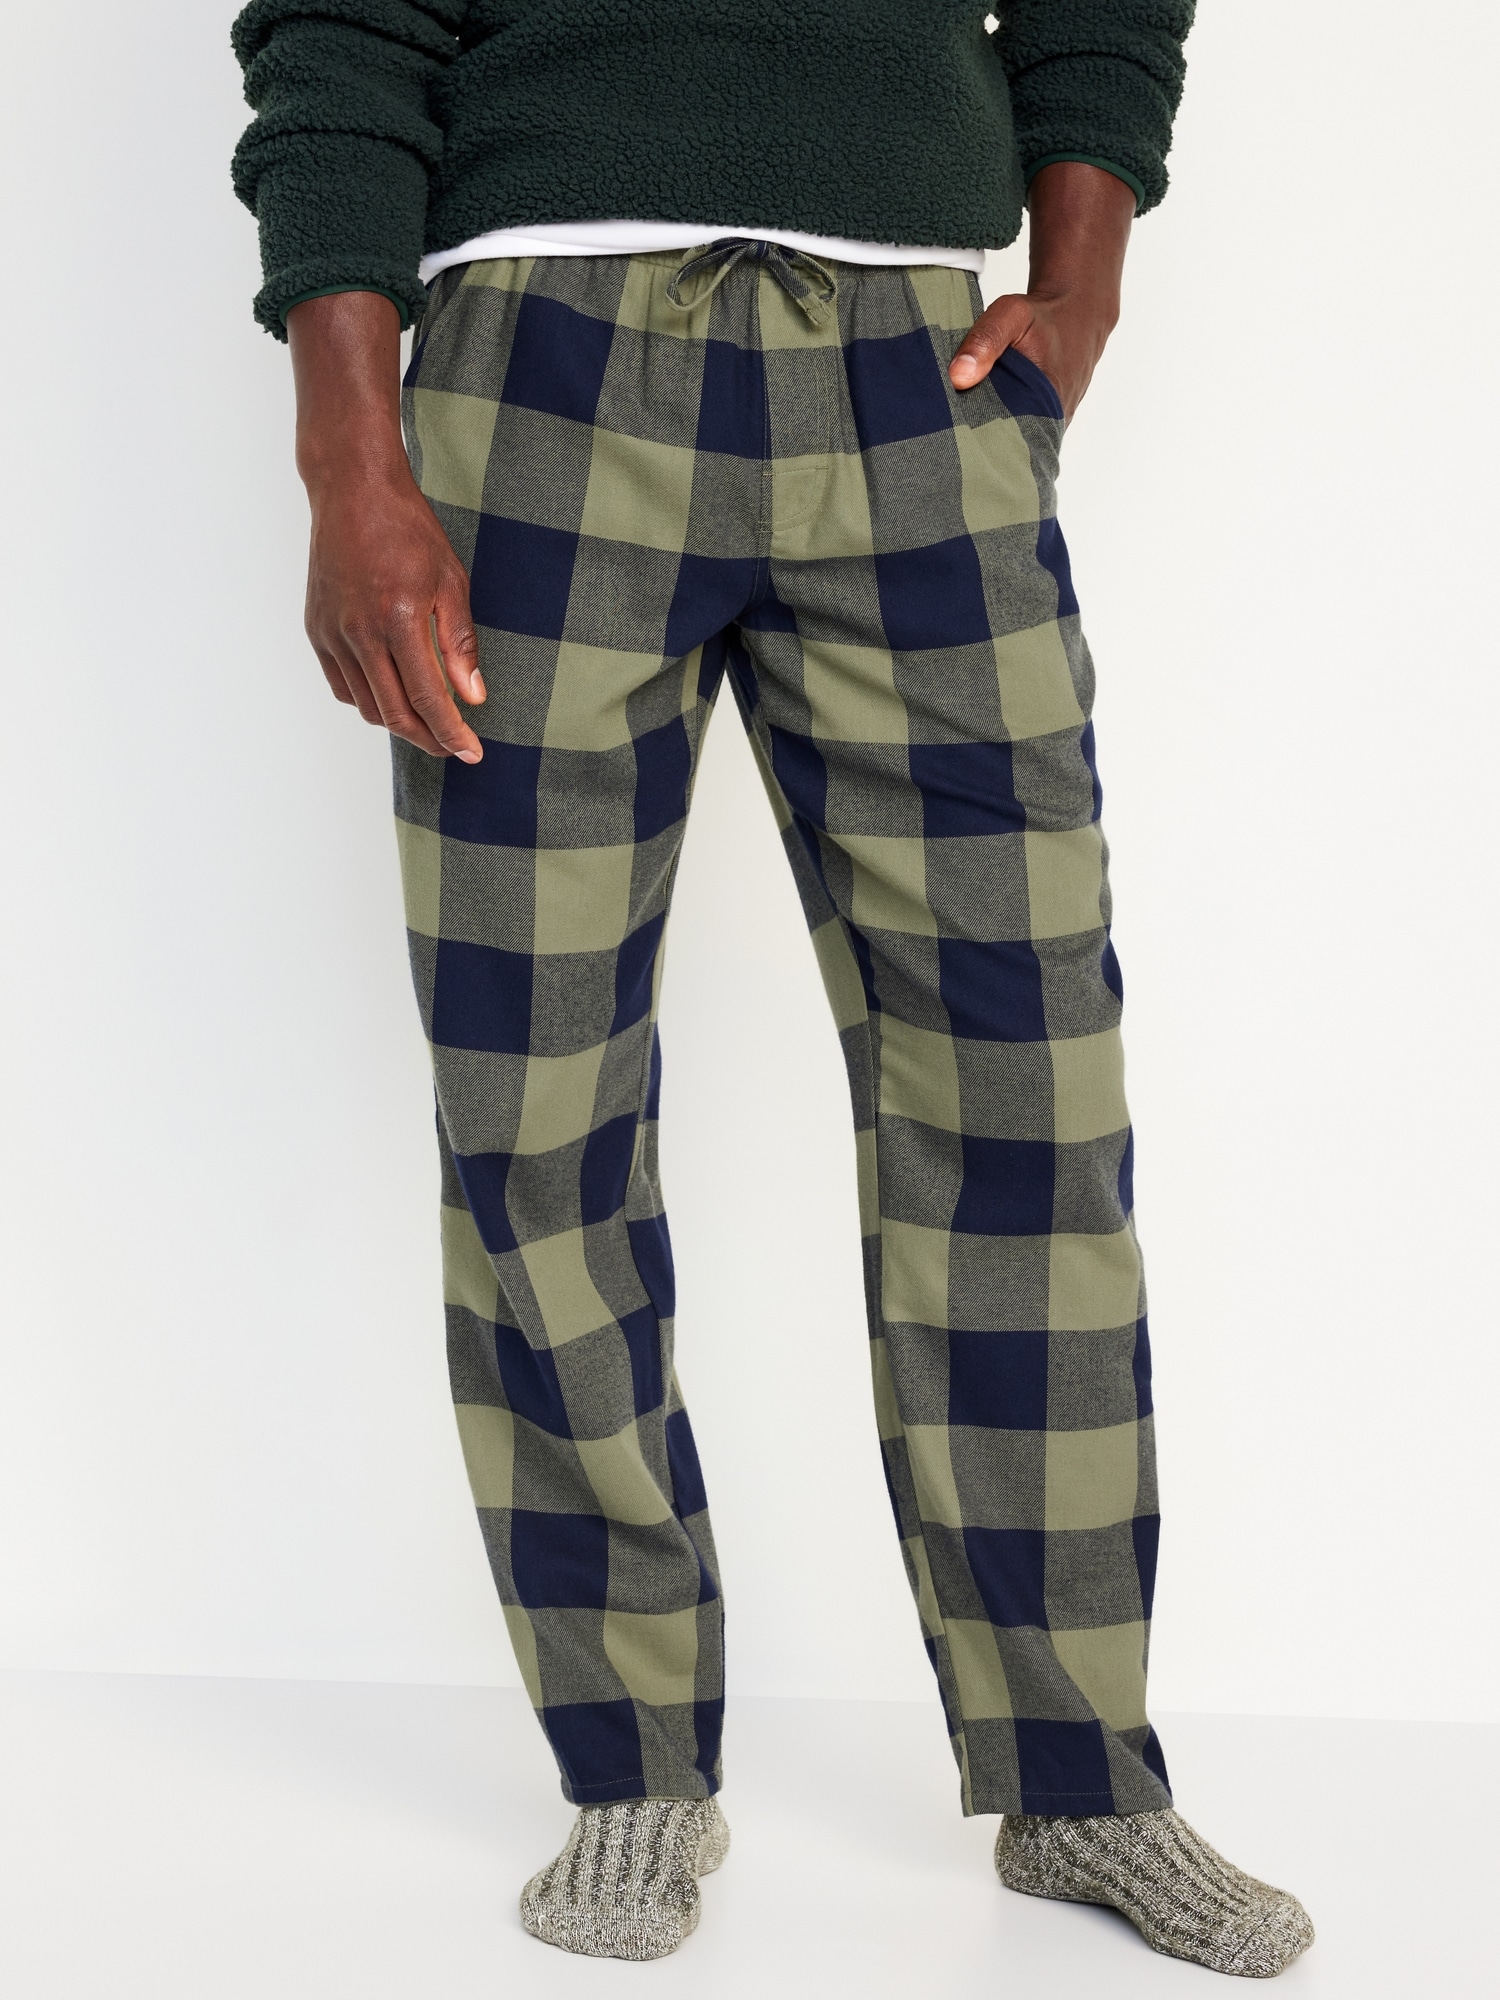 Old Navy Red Buffalo Flannel Pajama Pants for Women